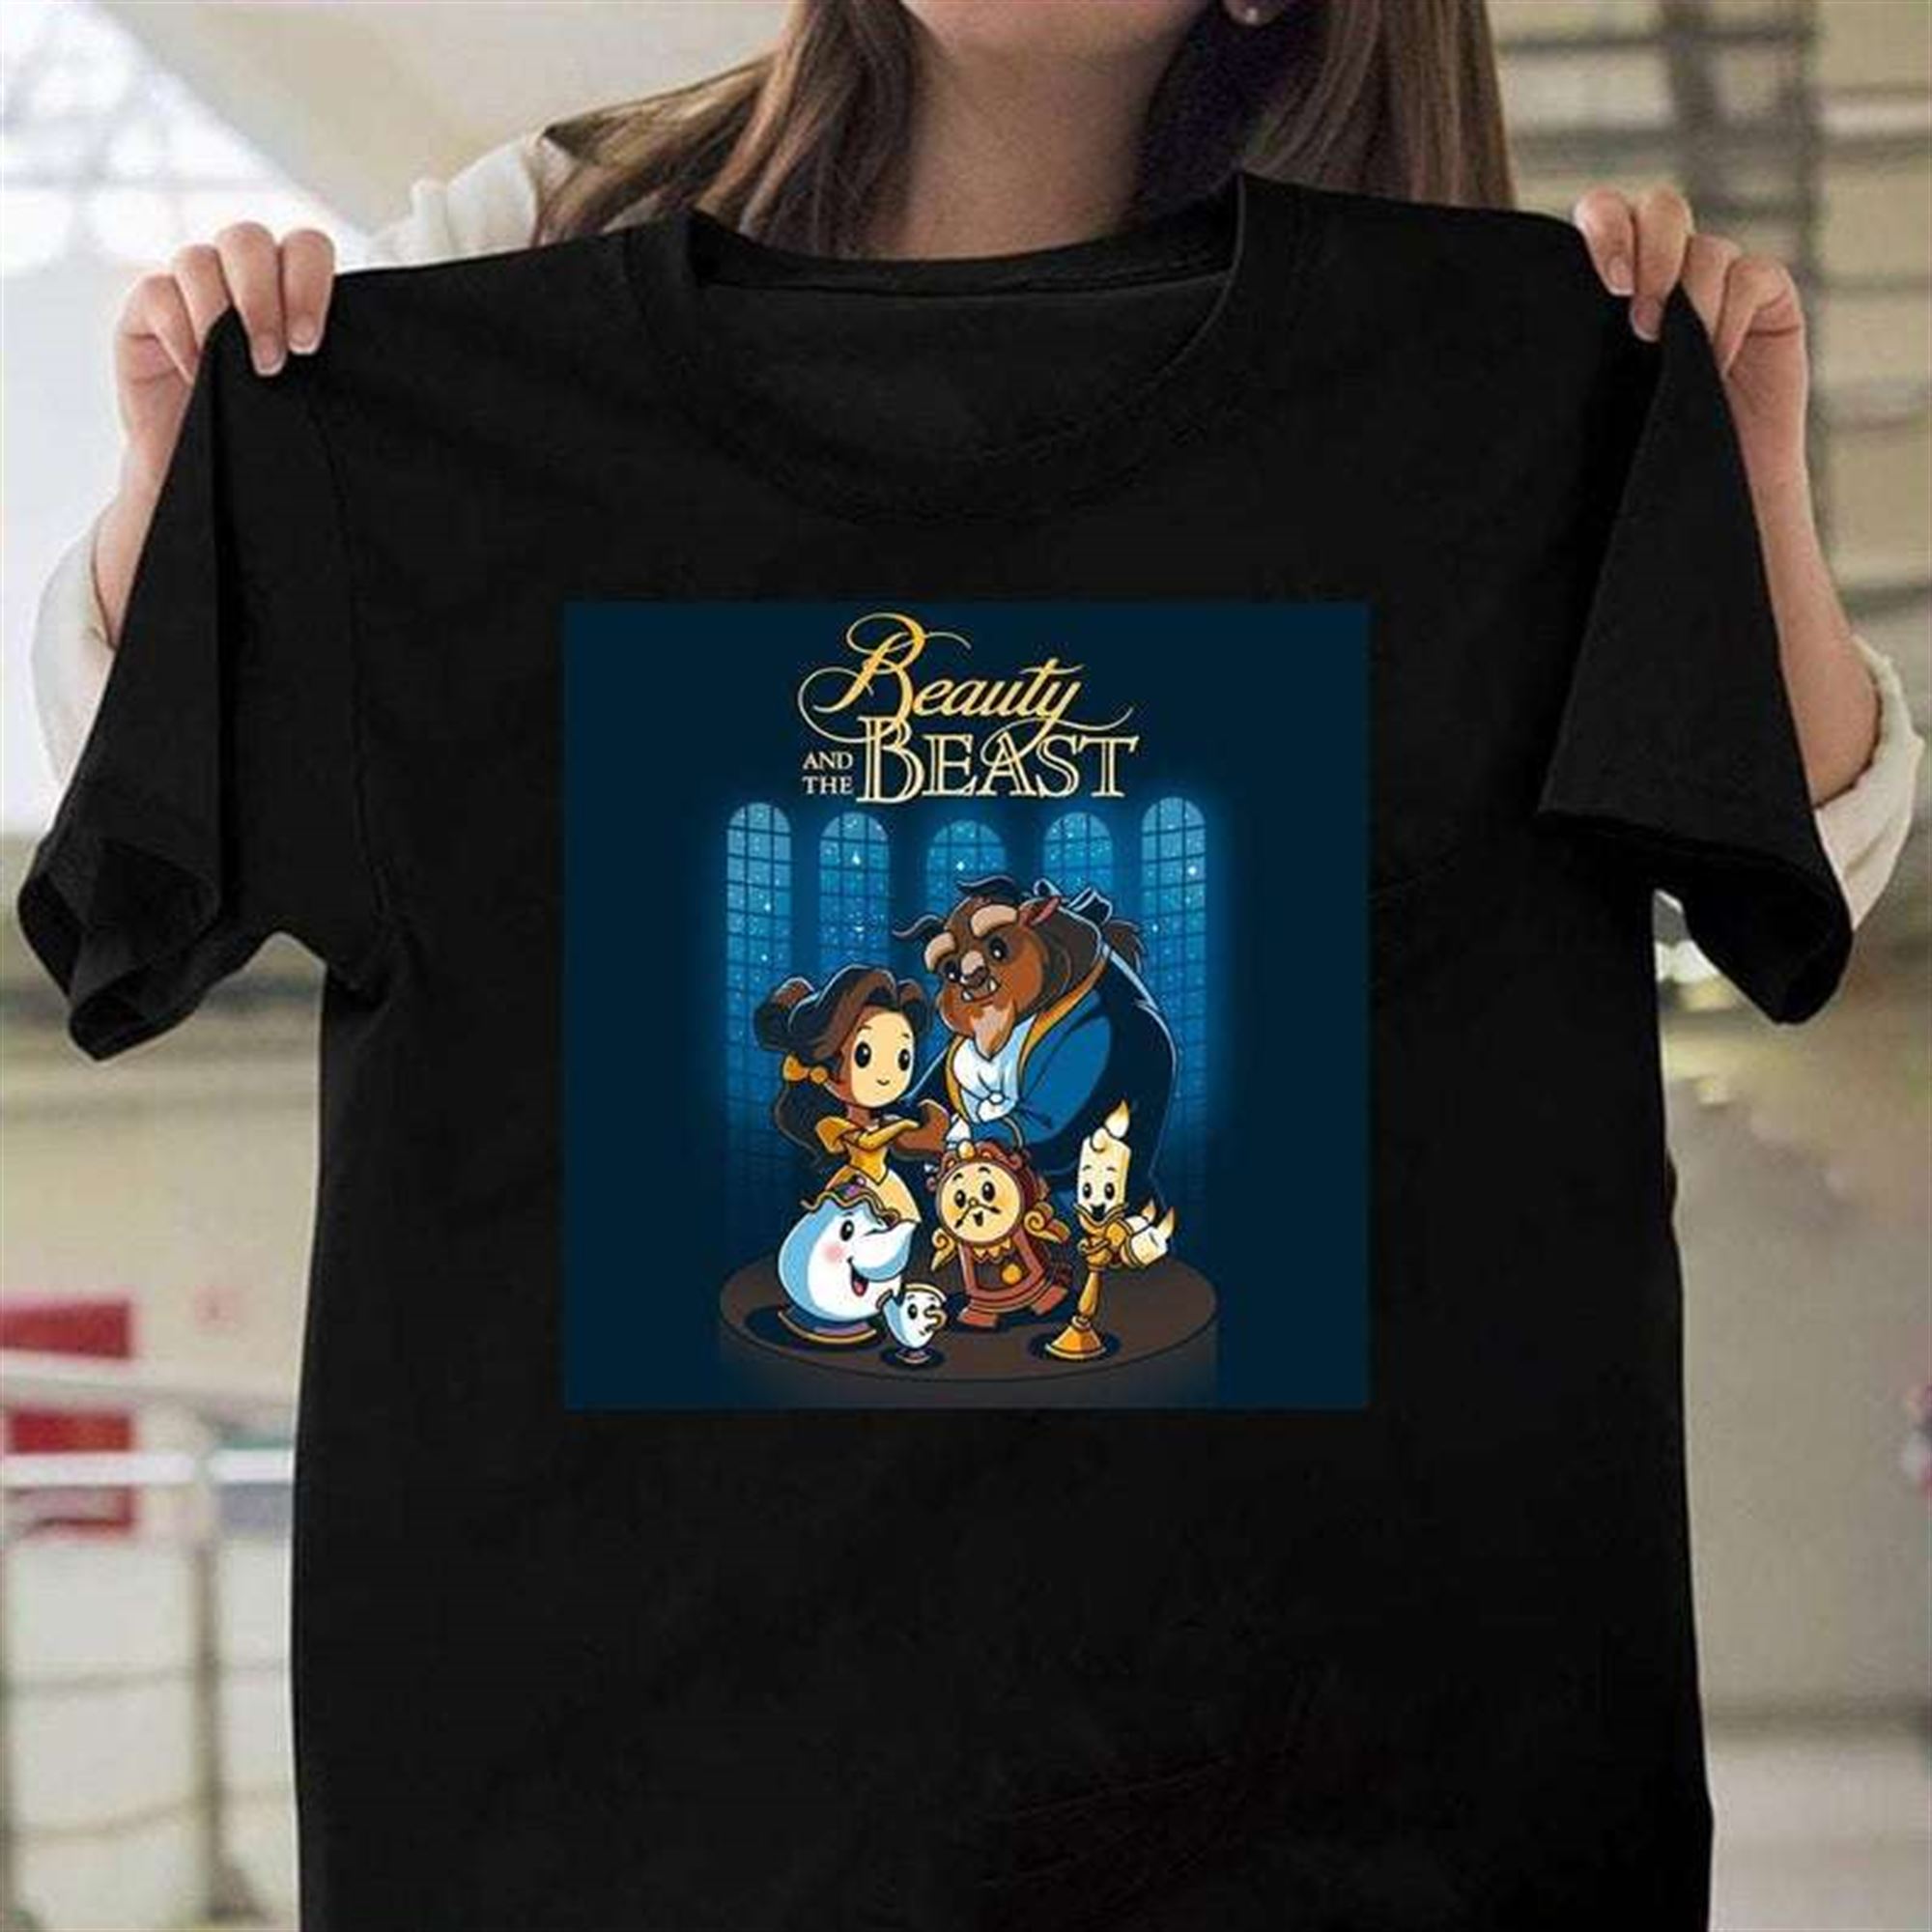 Beauty And The Beast Funny T Shirt Plus Size Up To 5x